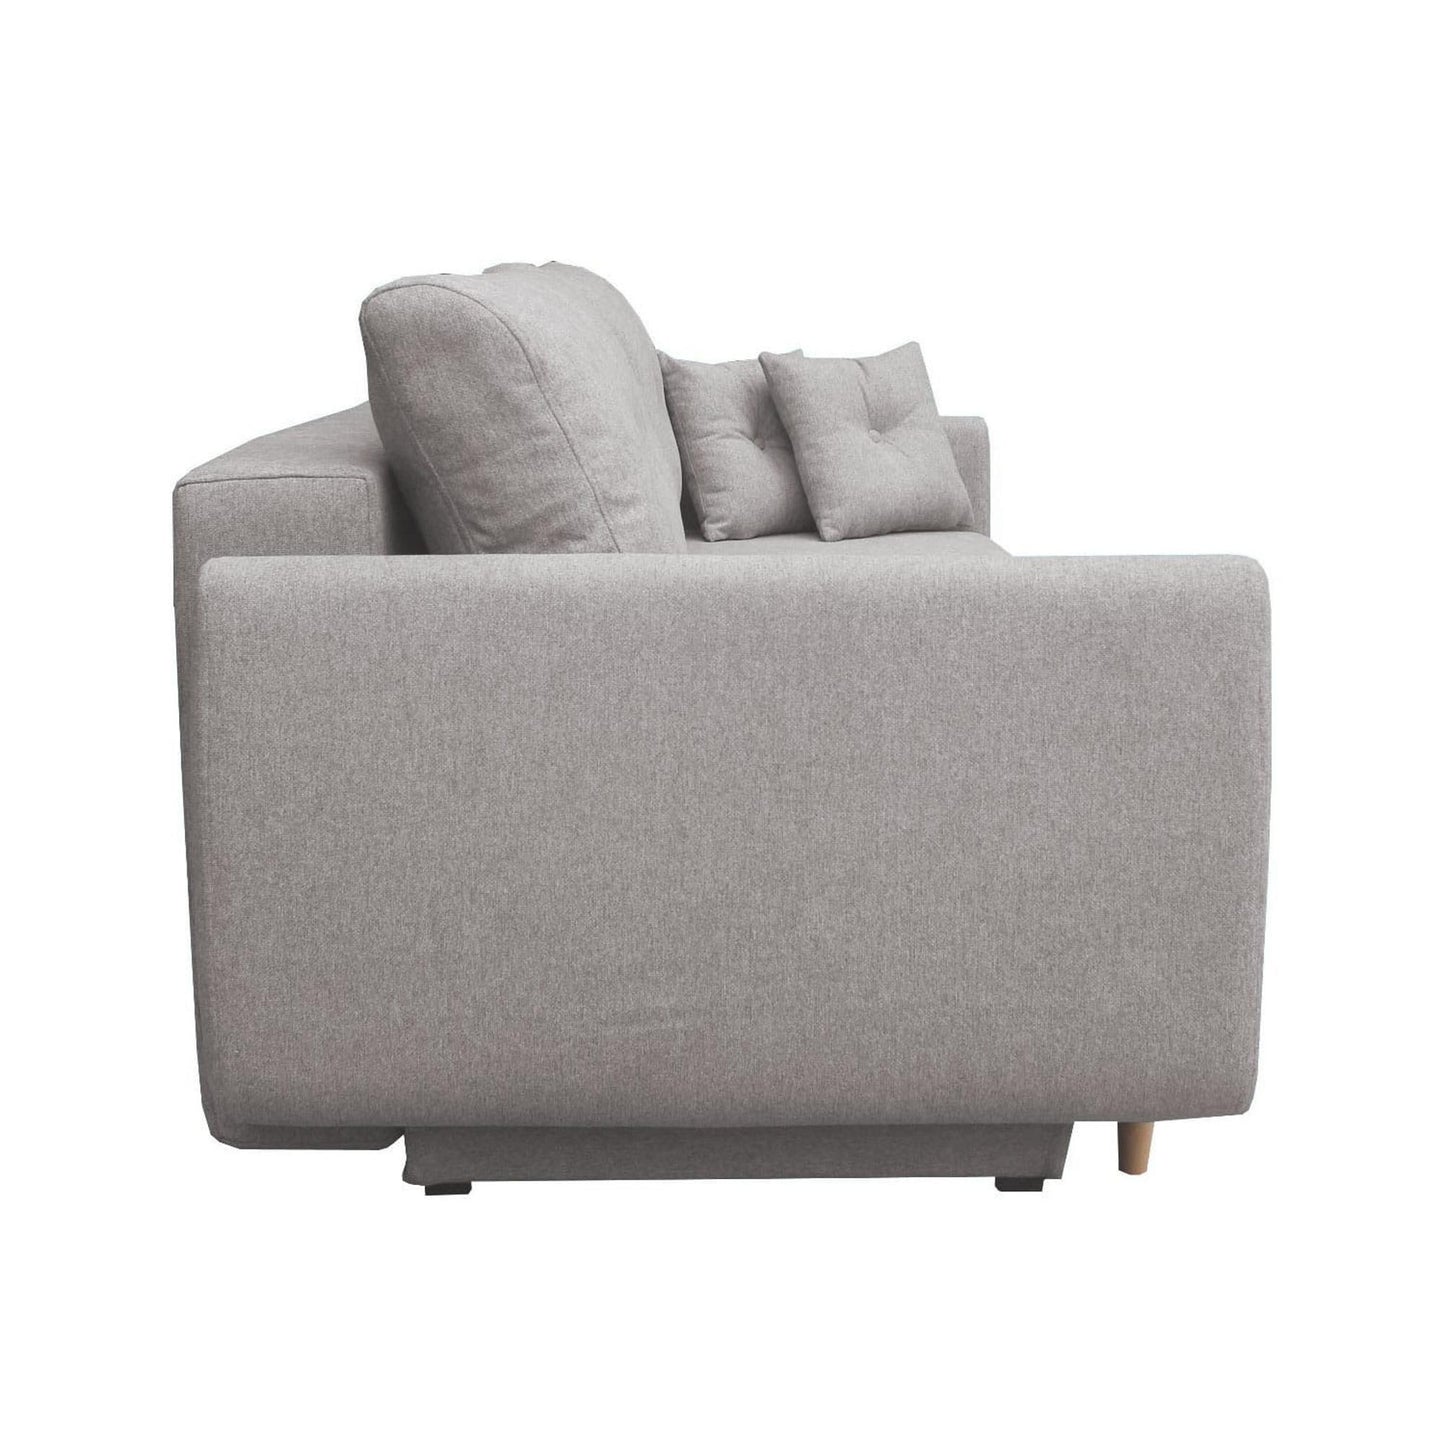 Nord Sofa Bed Sleeper in Light Gray